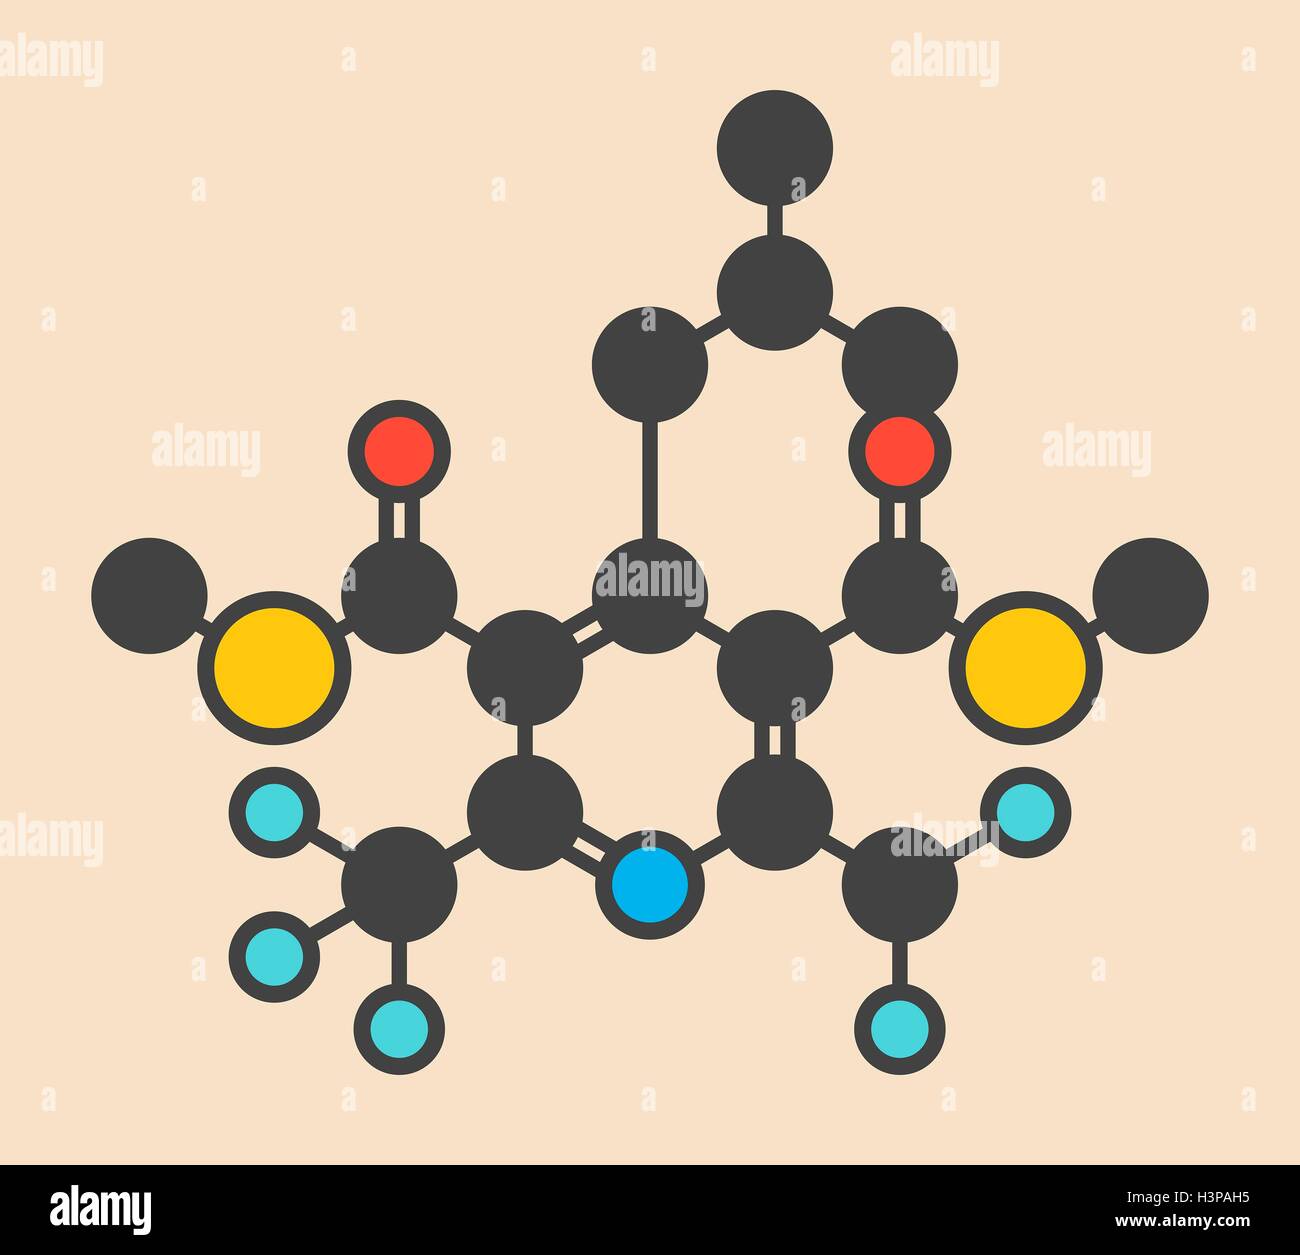 Dithiopyr preemergent herbicide molecule. Stylized skeletal formula (chemical structure). Atoms are shown as color-coded circles: hydrogen (hidden), carbon (grey), oxygen (red), nitrogen (blue), sulphur (yellow), fluorine (fluorine). Stock Photo